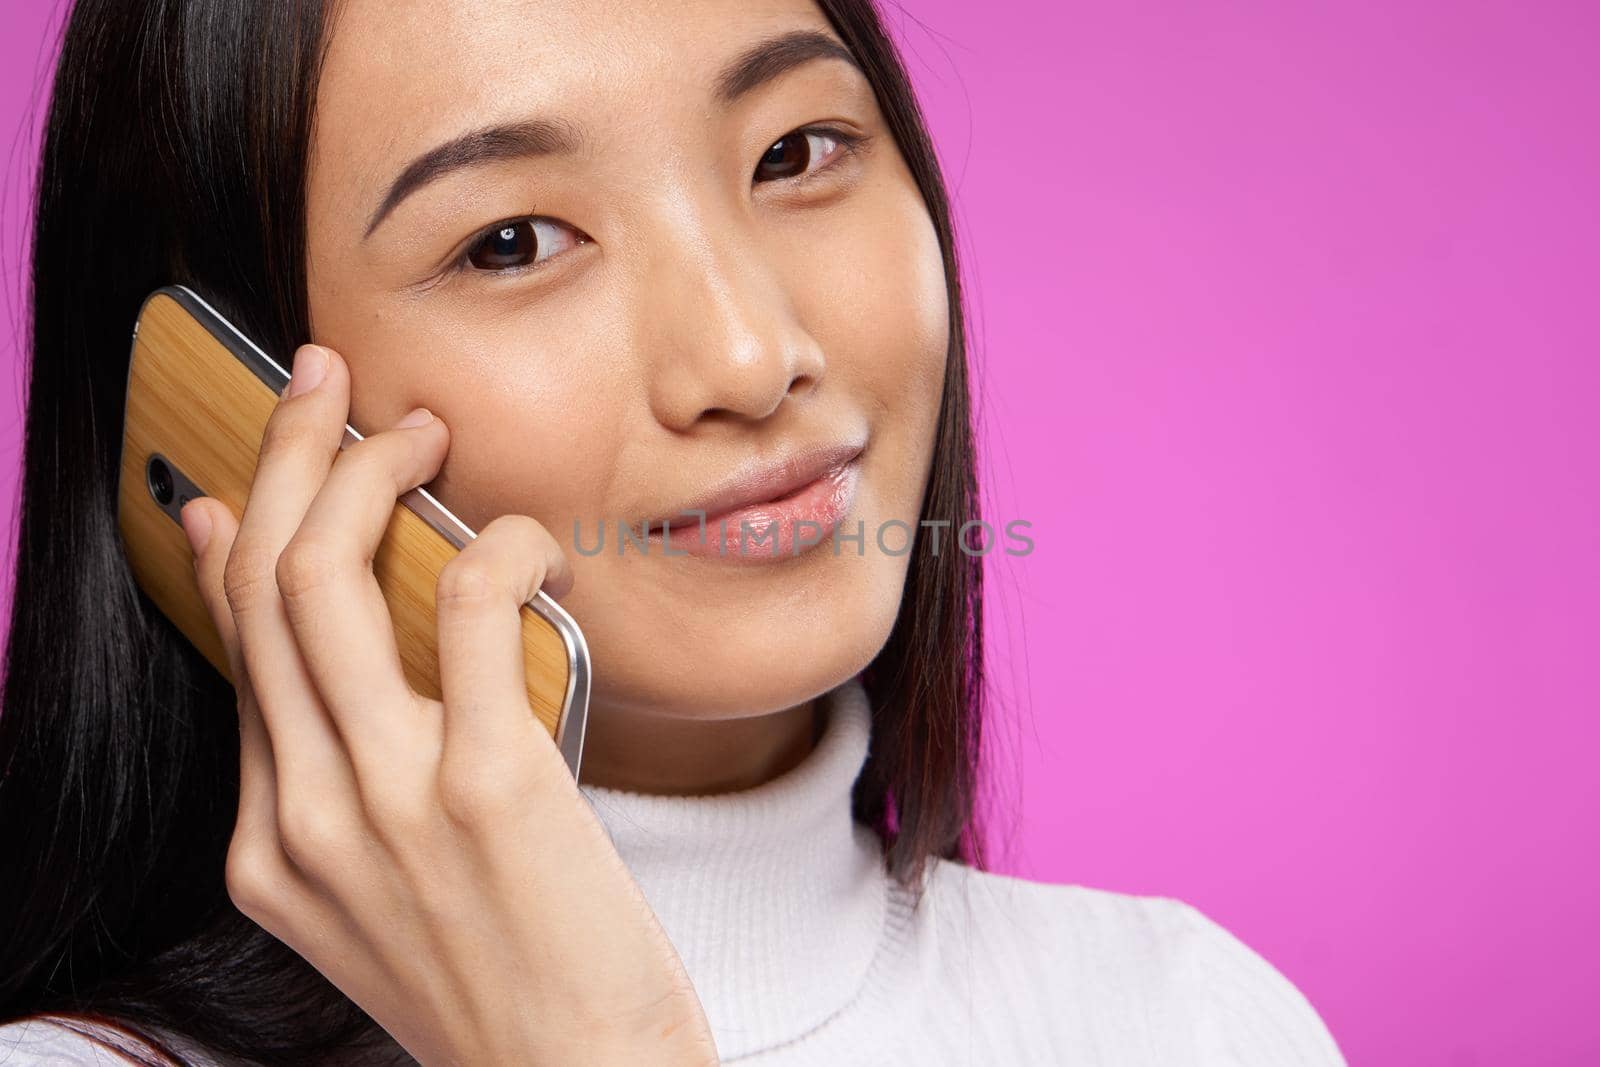 woman asian appearance phone close-up smile pink technology background. High quality photo